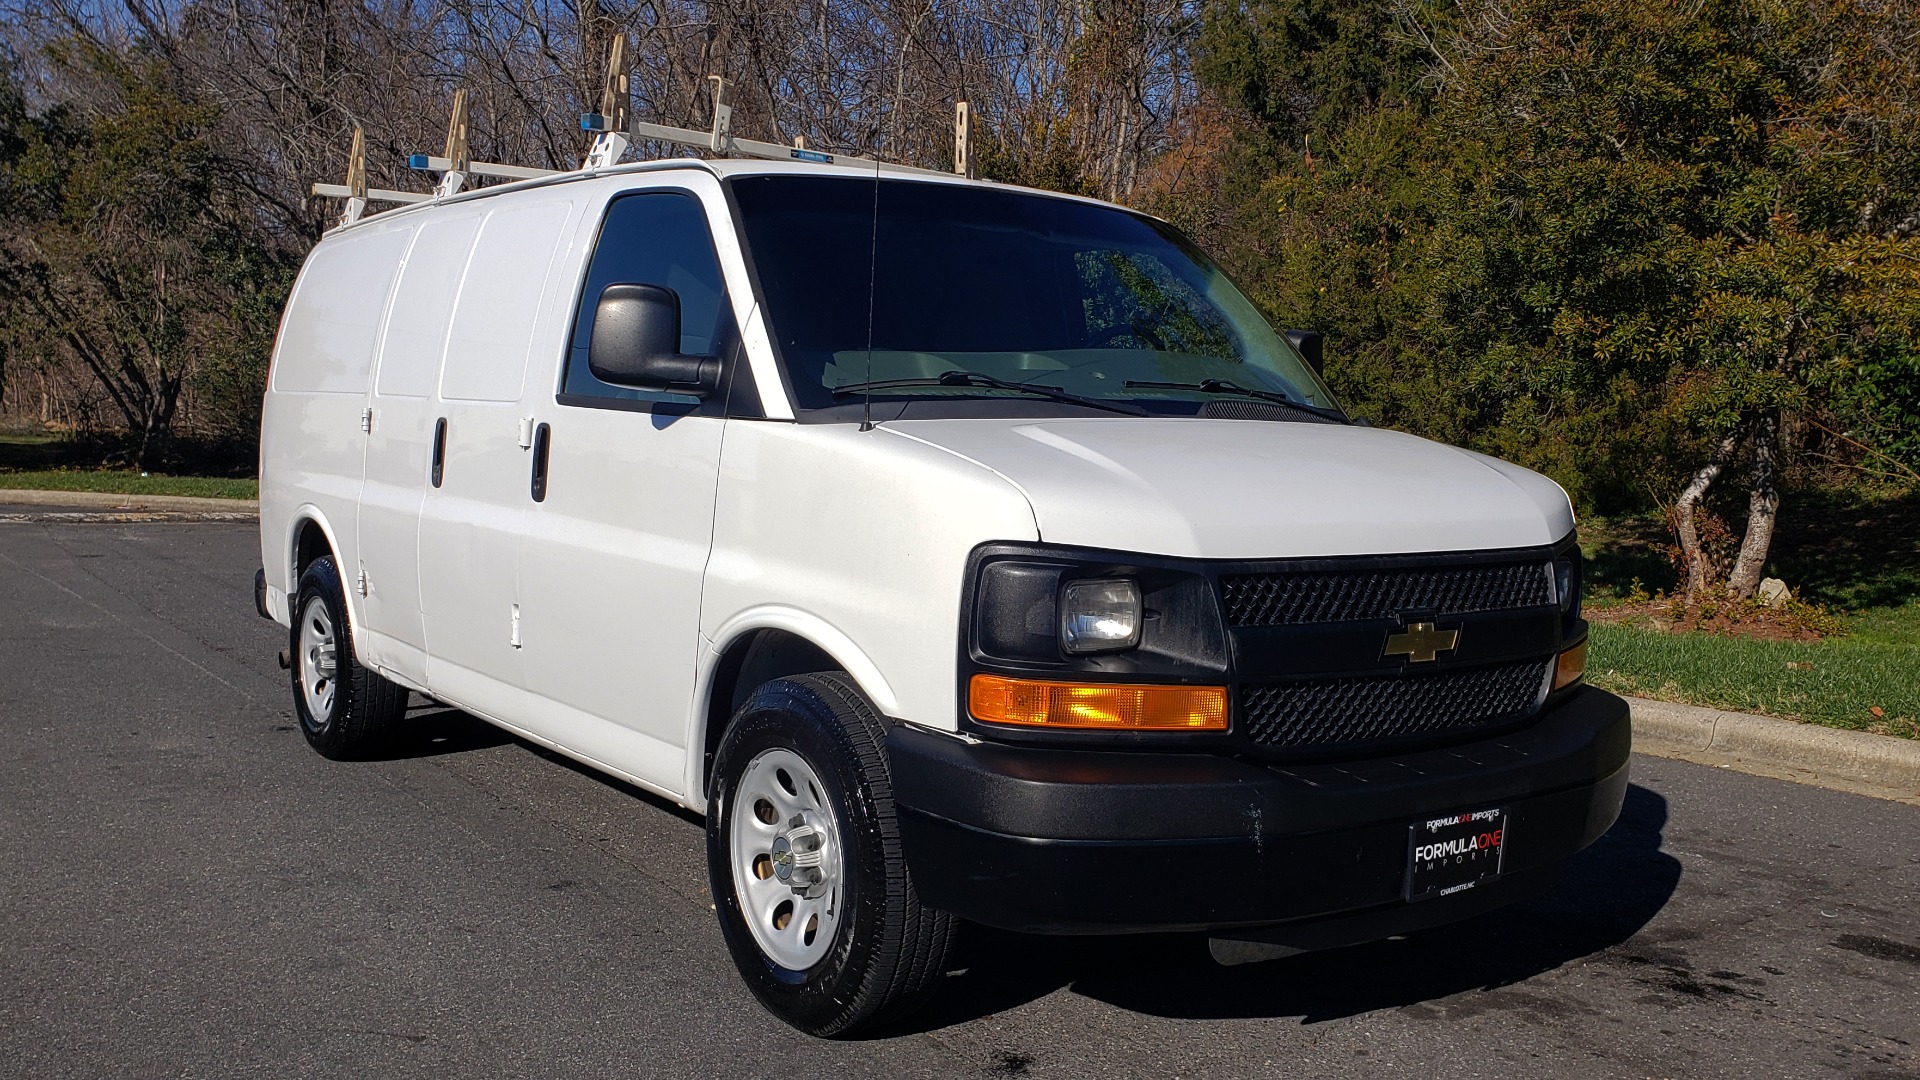 Used 2012 Chevrolet EXPRESS WORK VAN 1500 / 135 WB / 4.3L V6 / 4-SPD AUTO / ROOF RACK for sale Sold at Formula Imports in Charlotte NC 28227 4